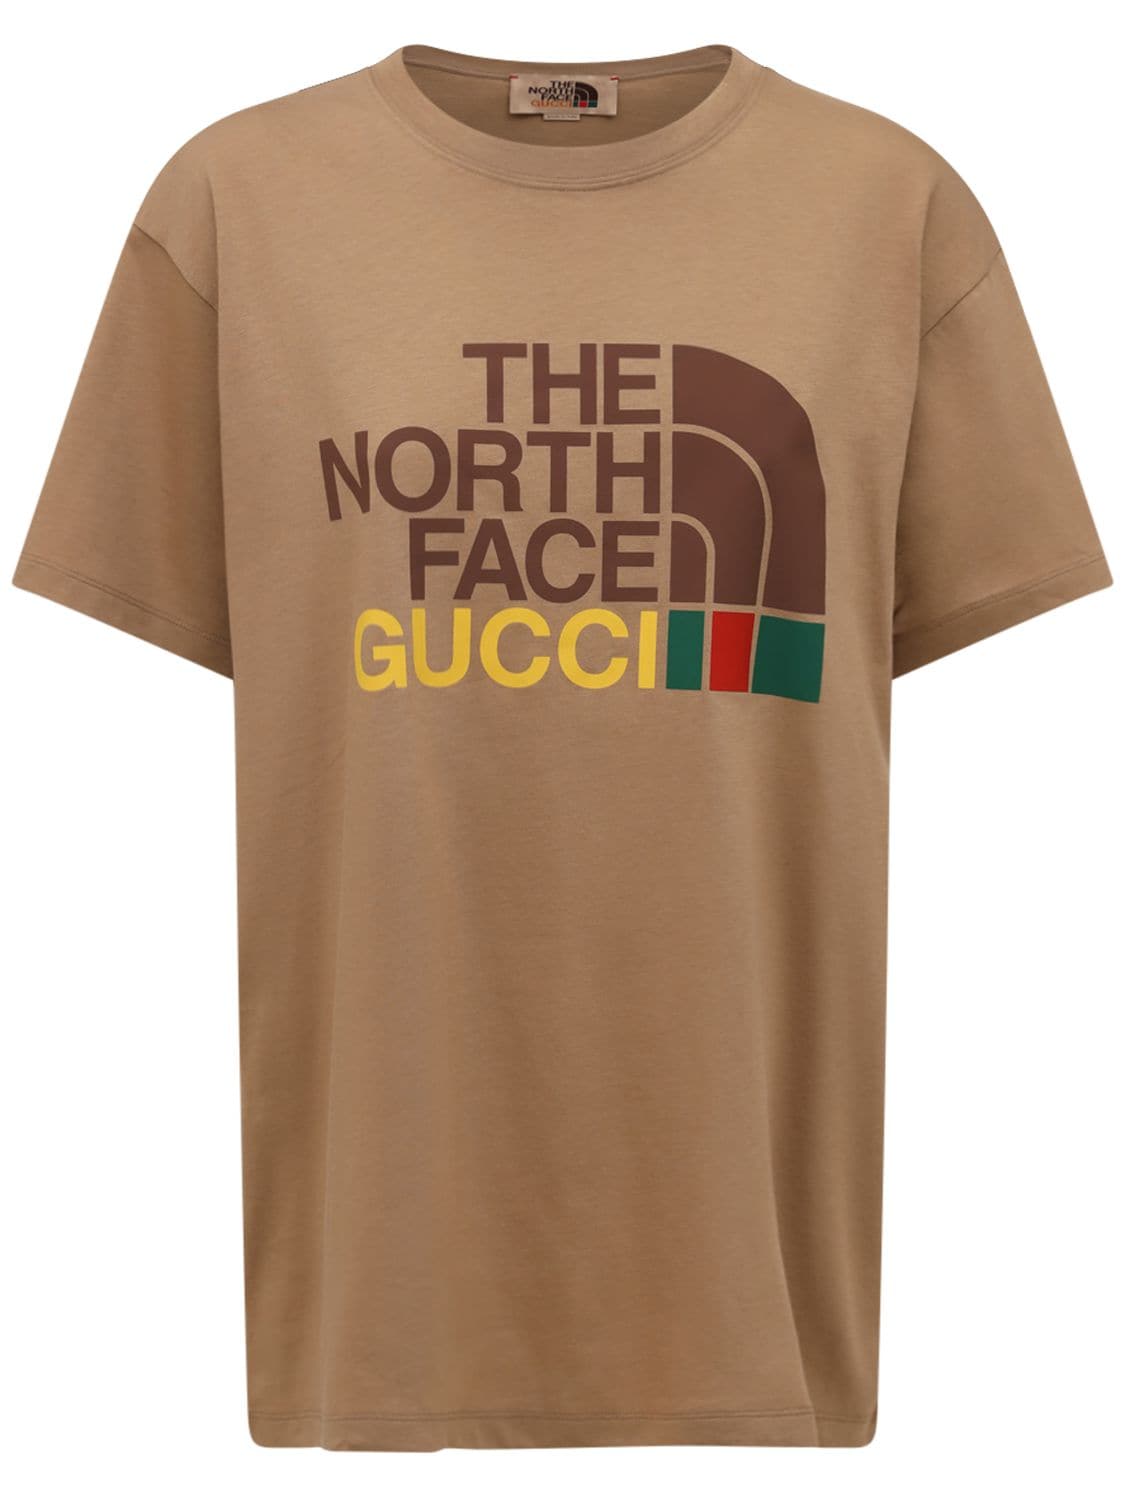 The North Face Printed Cotton T-Shirt